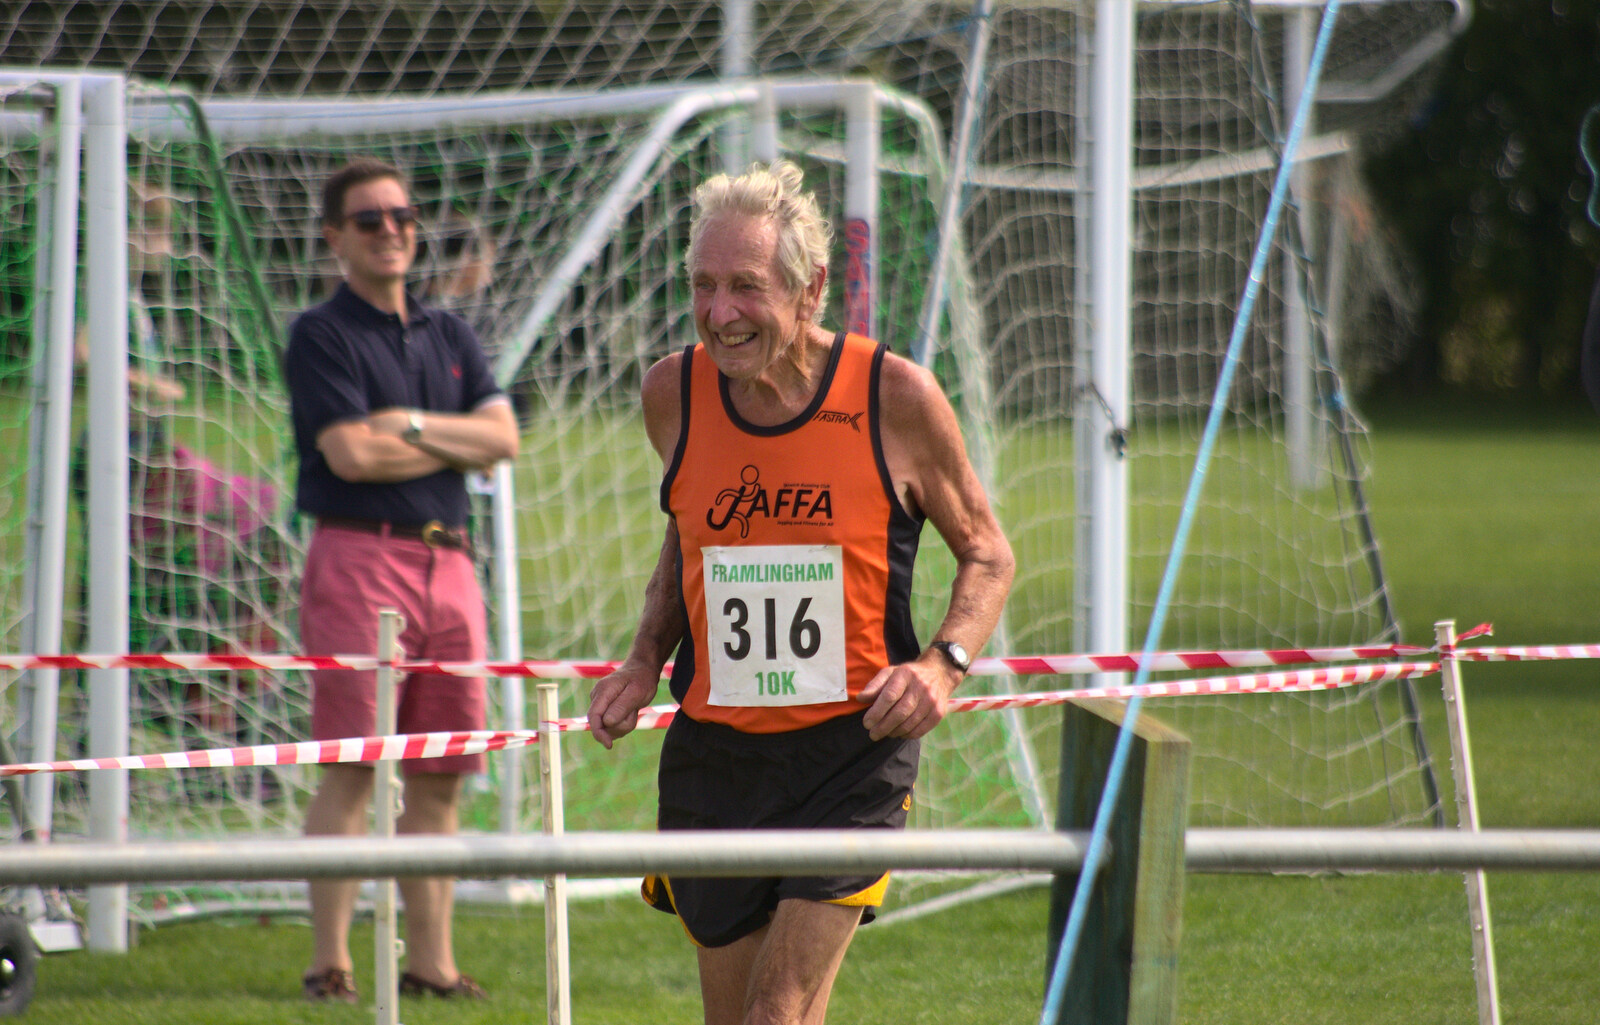 One of the oldest runners crosses the line from The Framlingham 10k Run, Suffolk - 31st August 2014